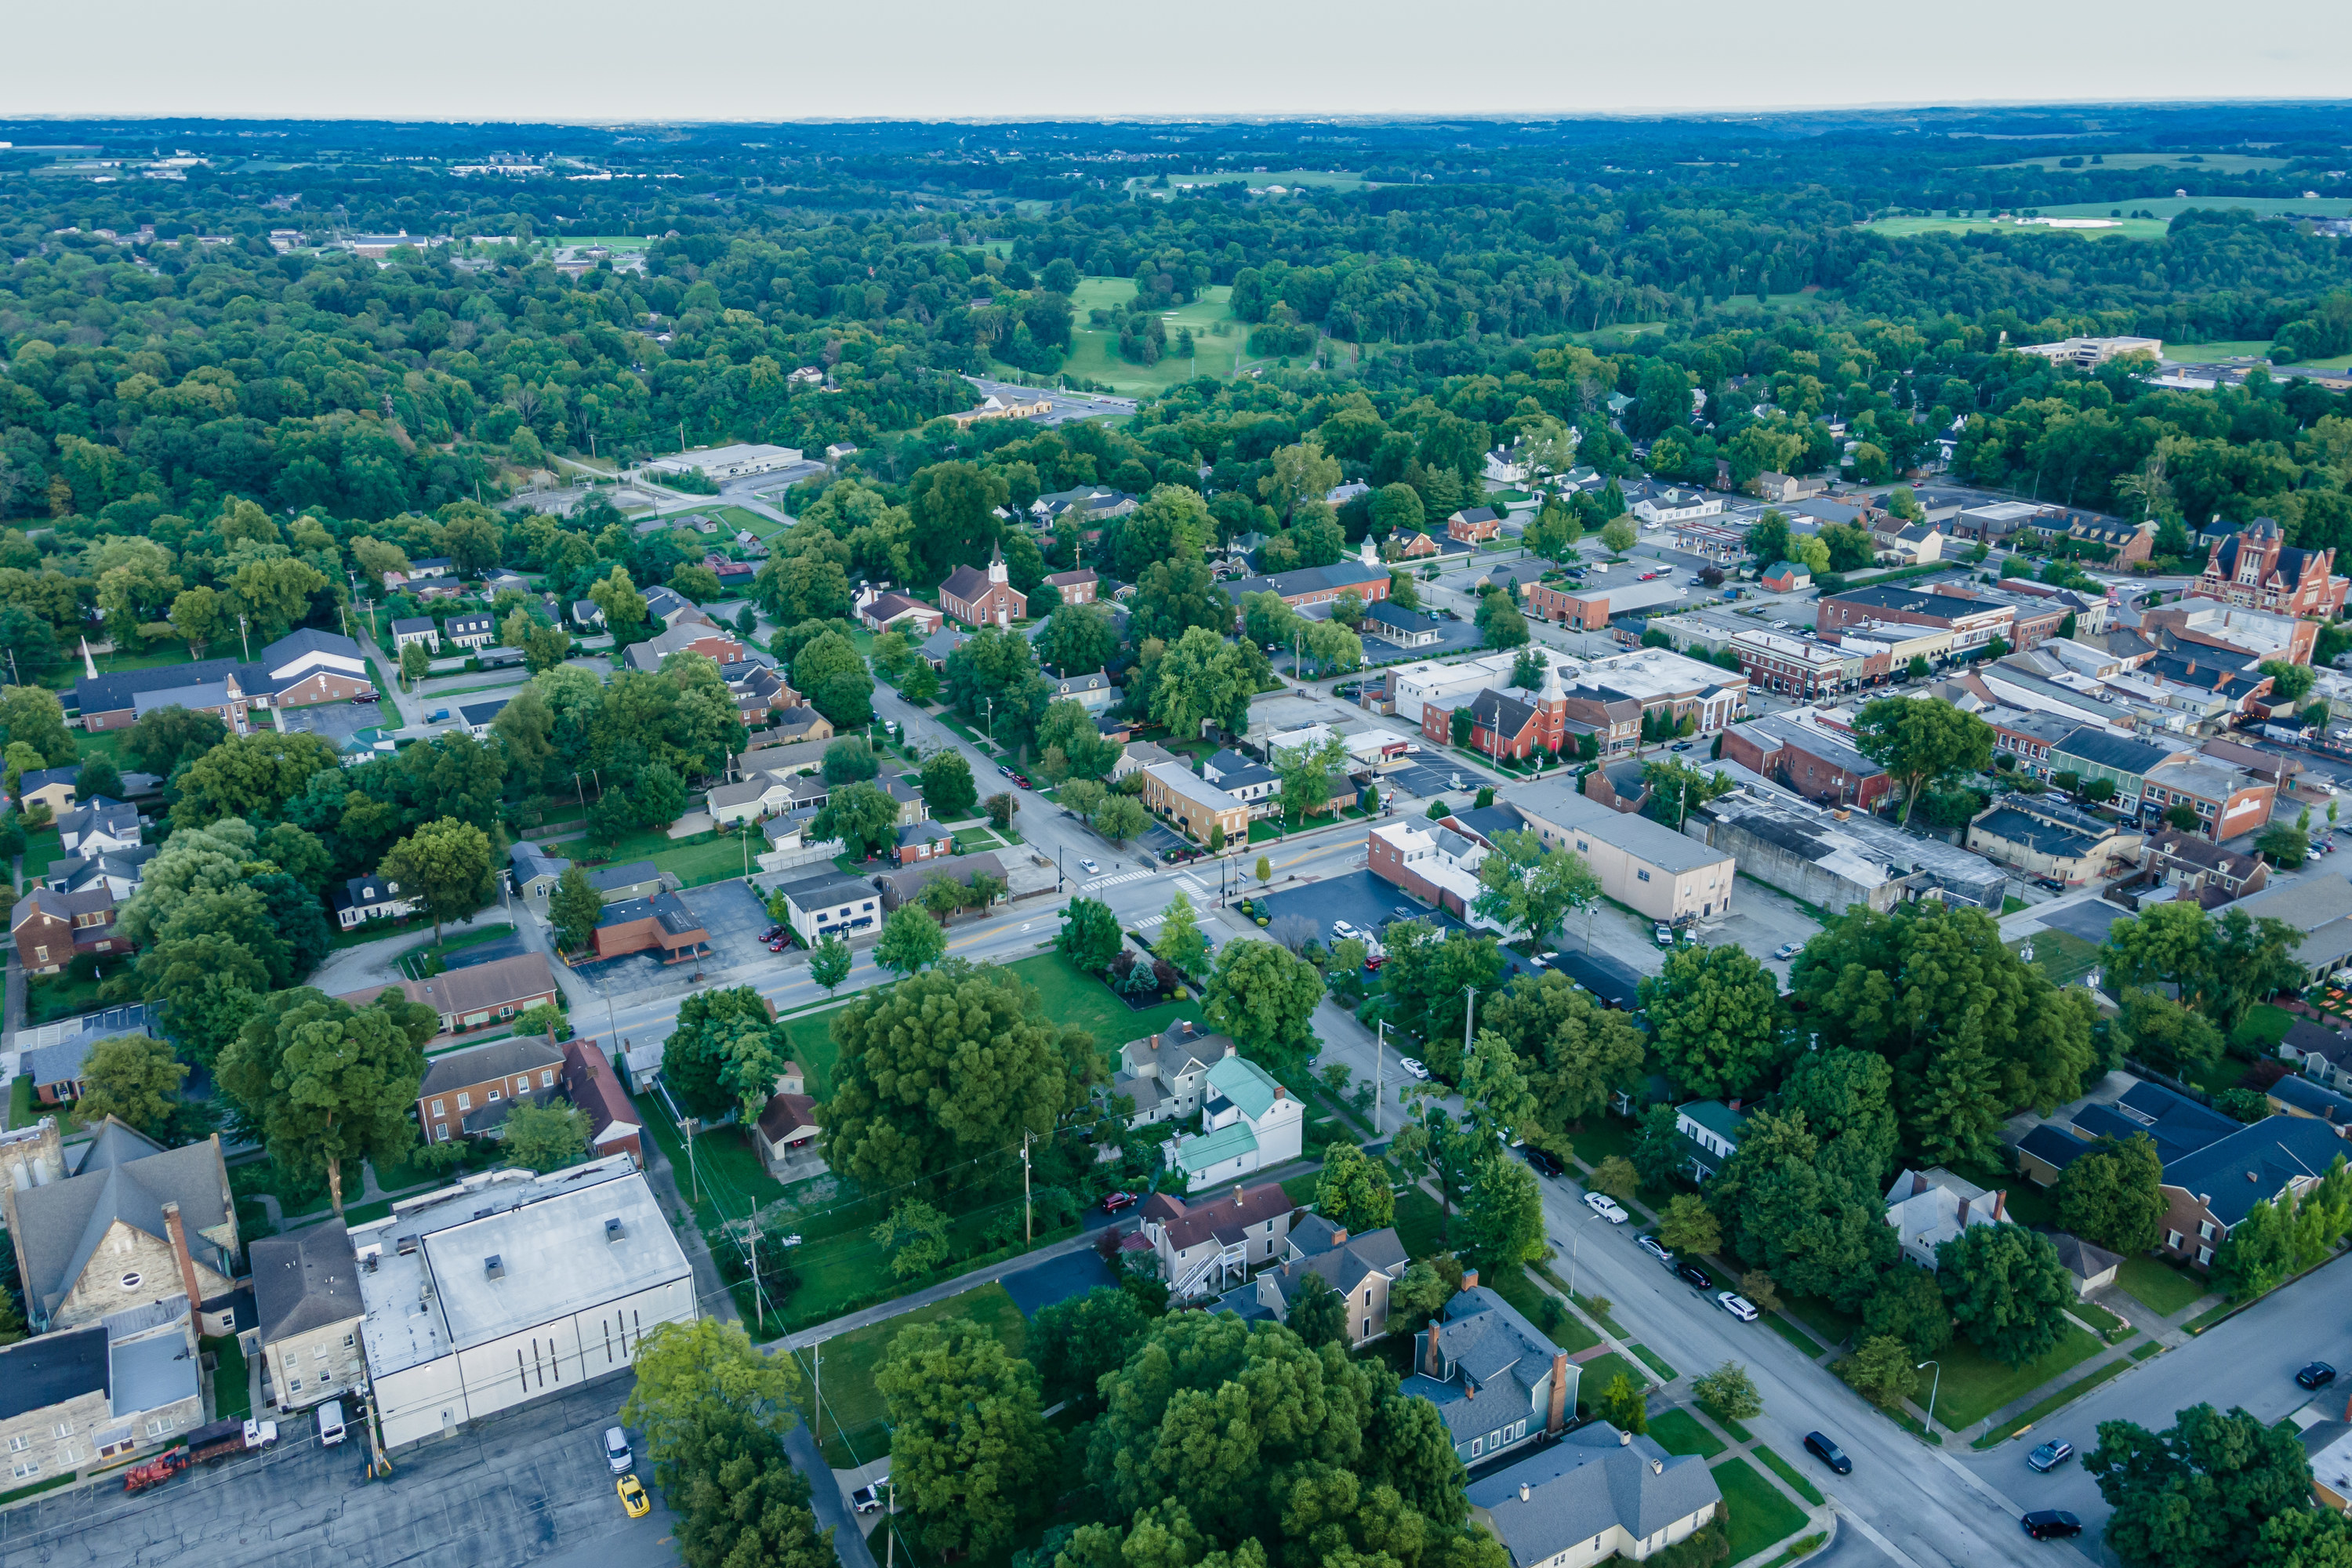 Adorable aerial view of the historic Bardstown, KY on a gorgeous sunny summer evening with a few clouds in the sky.